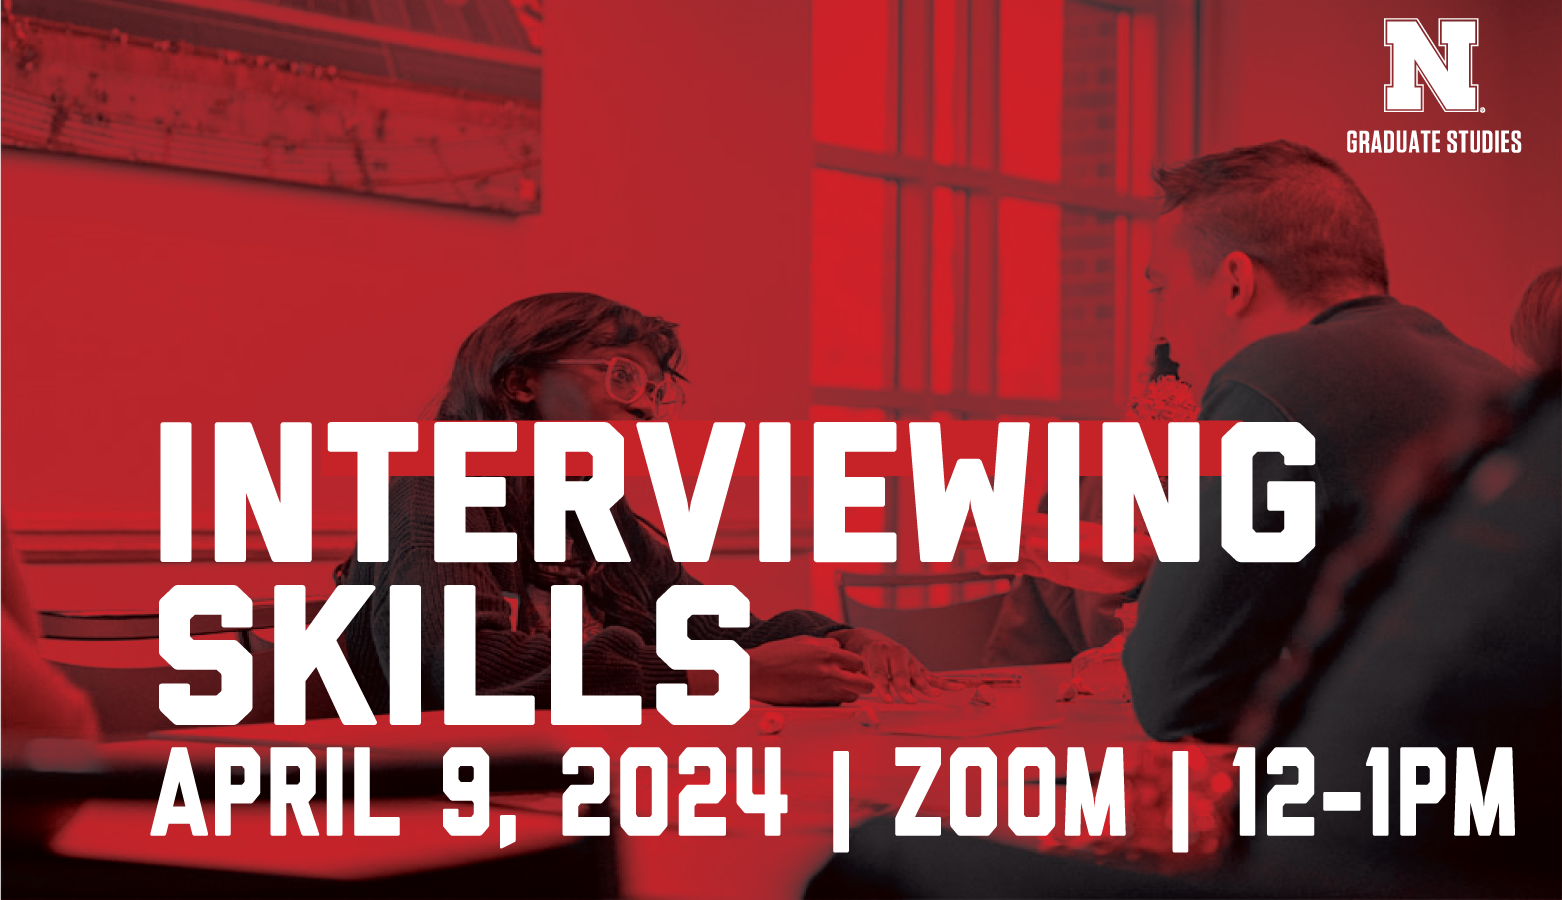 Interviewing Skills (Zoom) on April 9